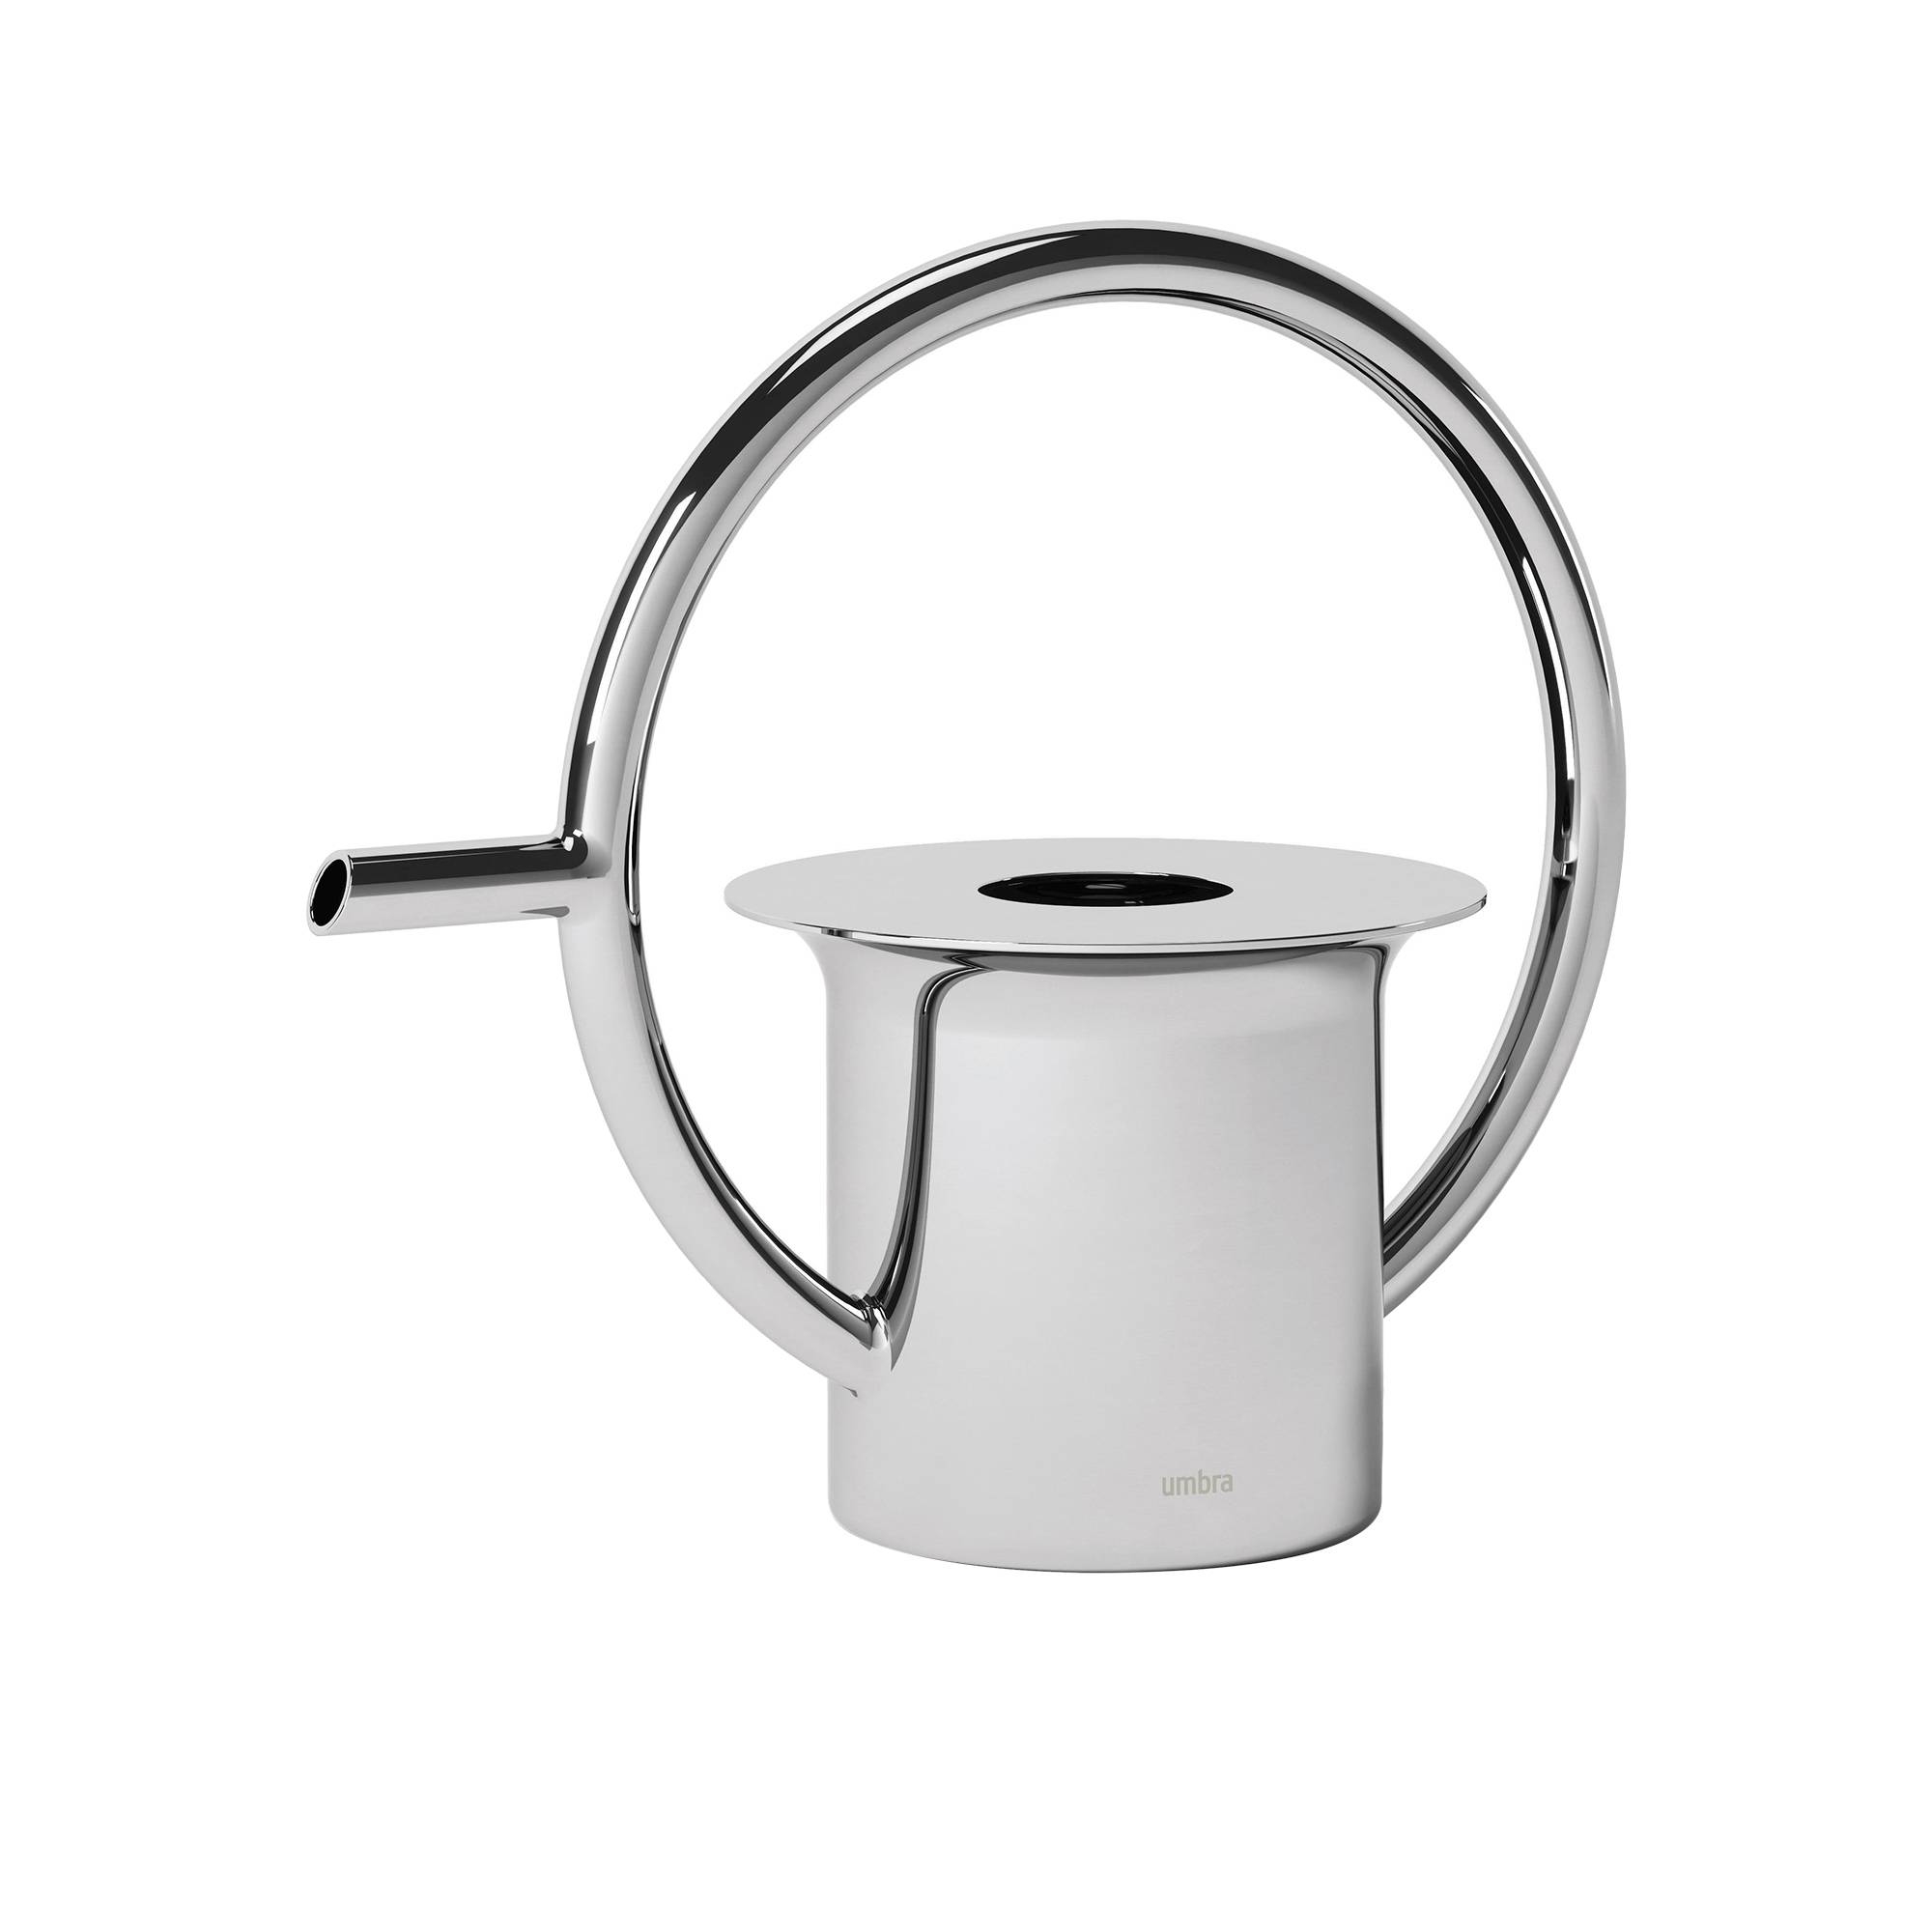 Umbra Quench Stainless Steel Watering Can 1L Image 1